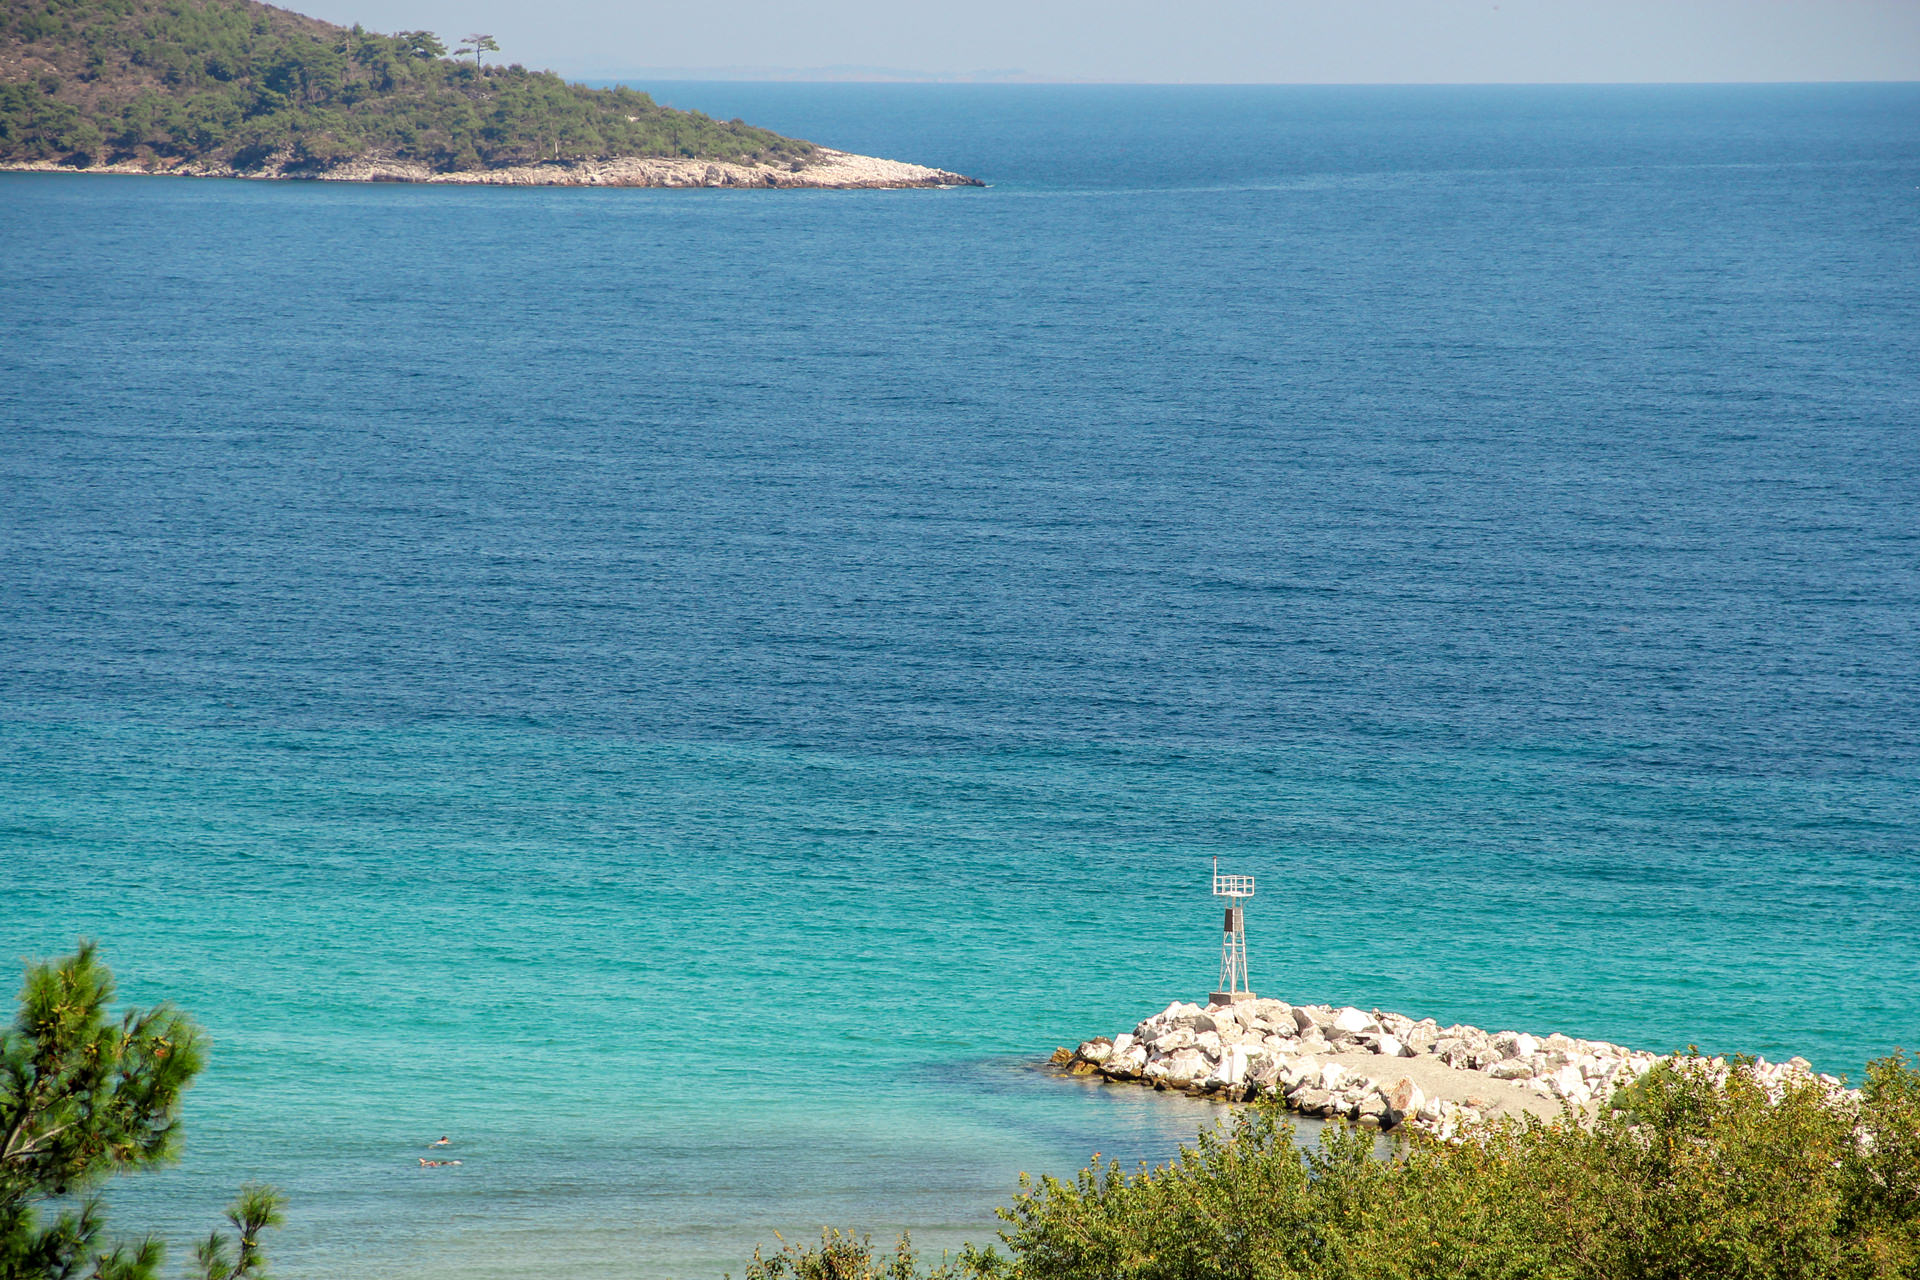 What to see in 3 days in Thassos?